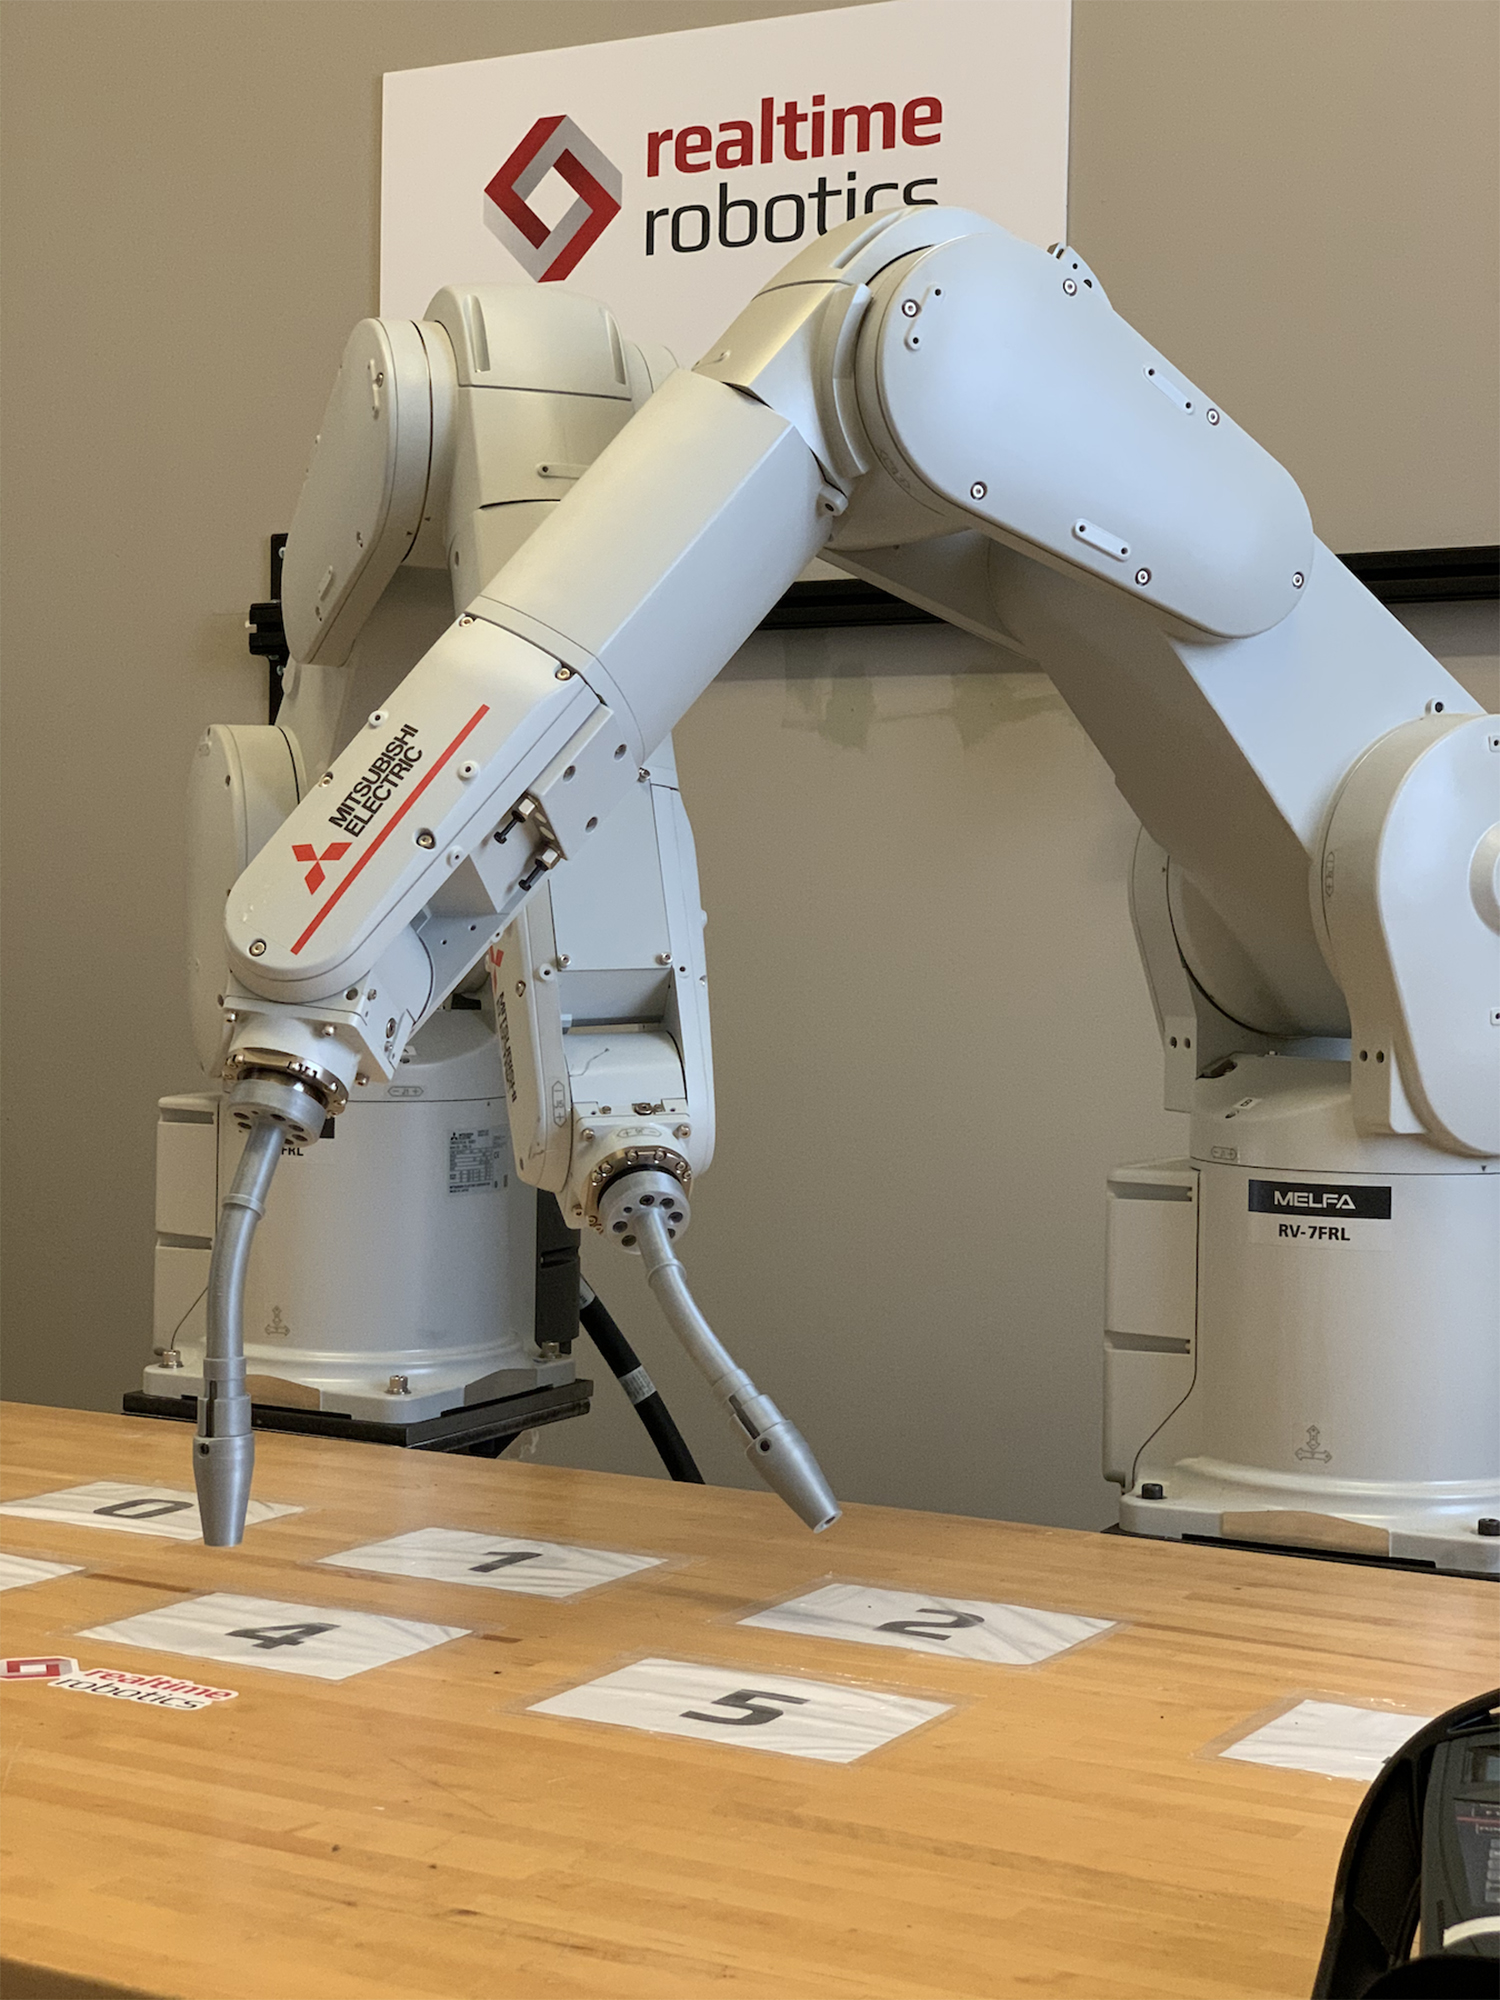 Mitsubishi Electric industrial robots with Realtime Robotics’ technology embedded can work safely and collision-free in an unstructured and dynamic environment. [Source: Mitsubishi Electric Europe B.V.]